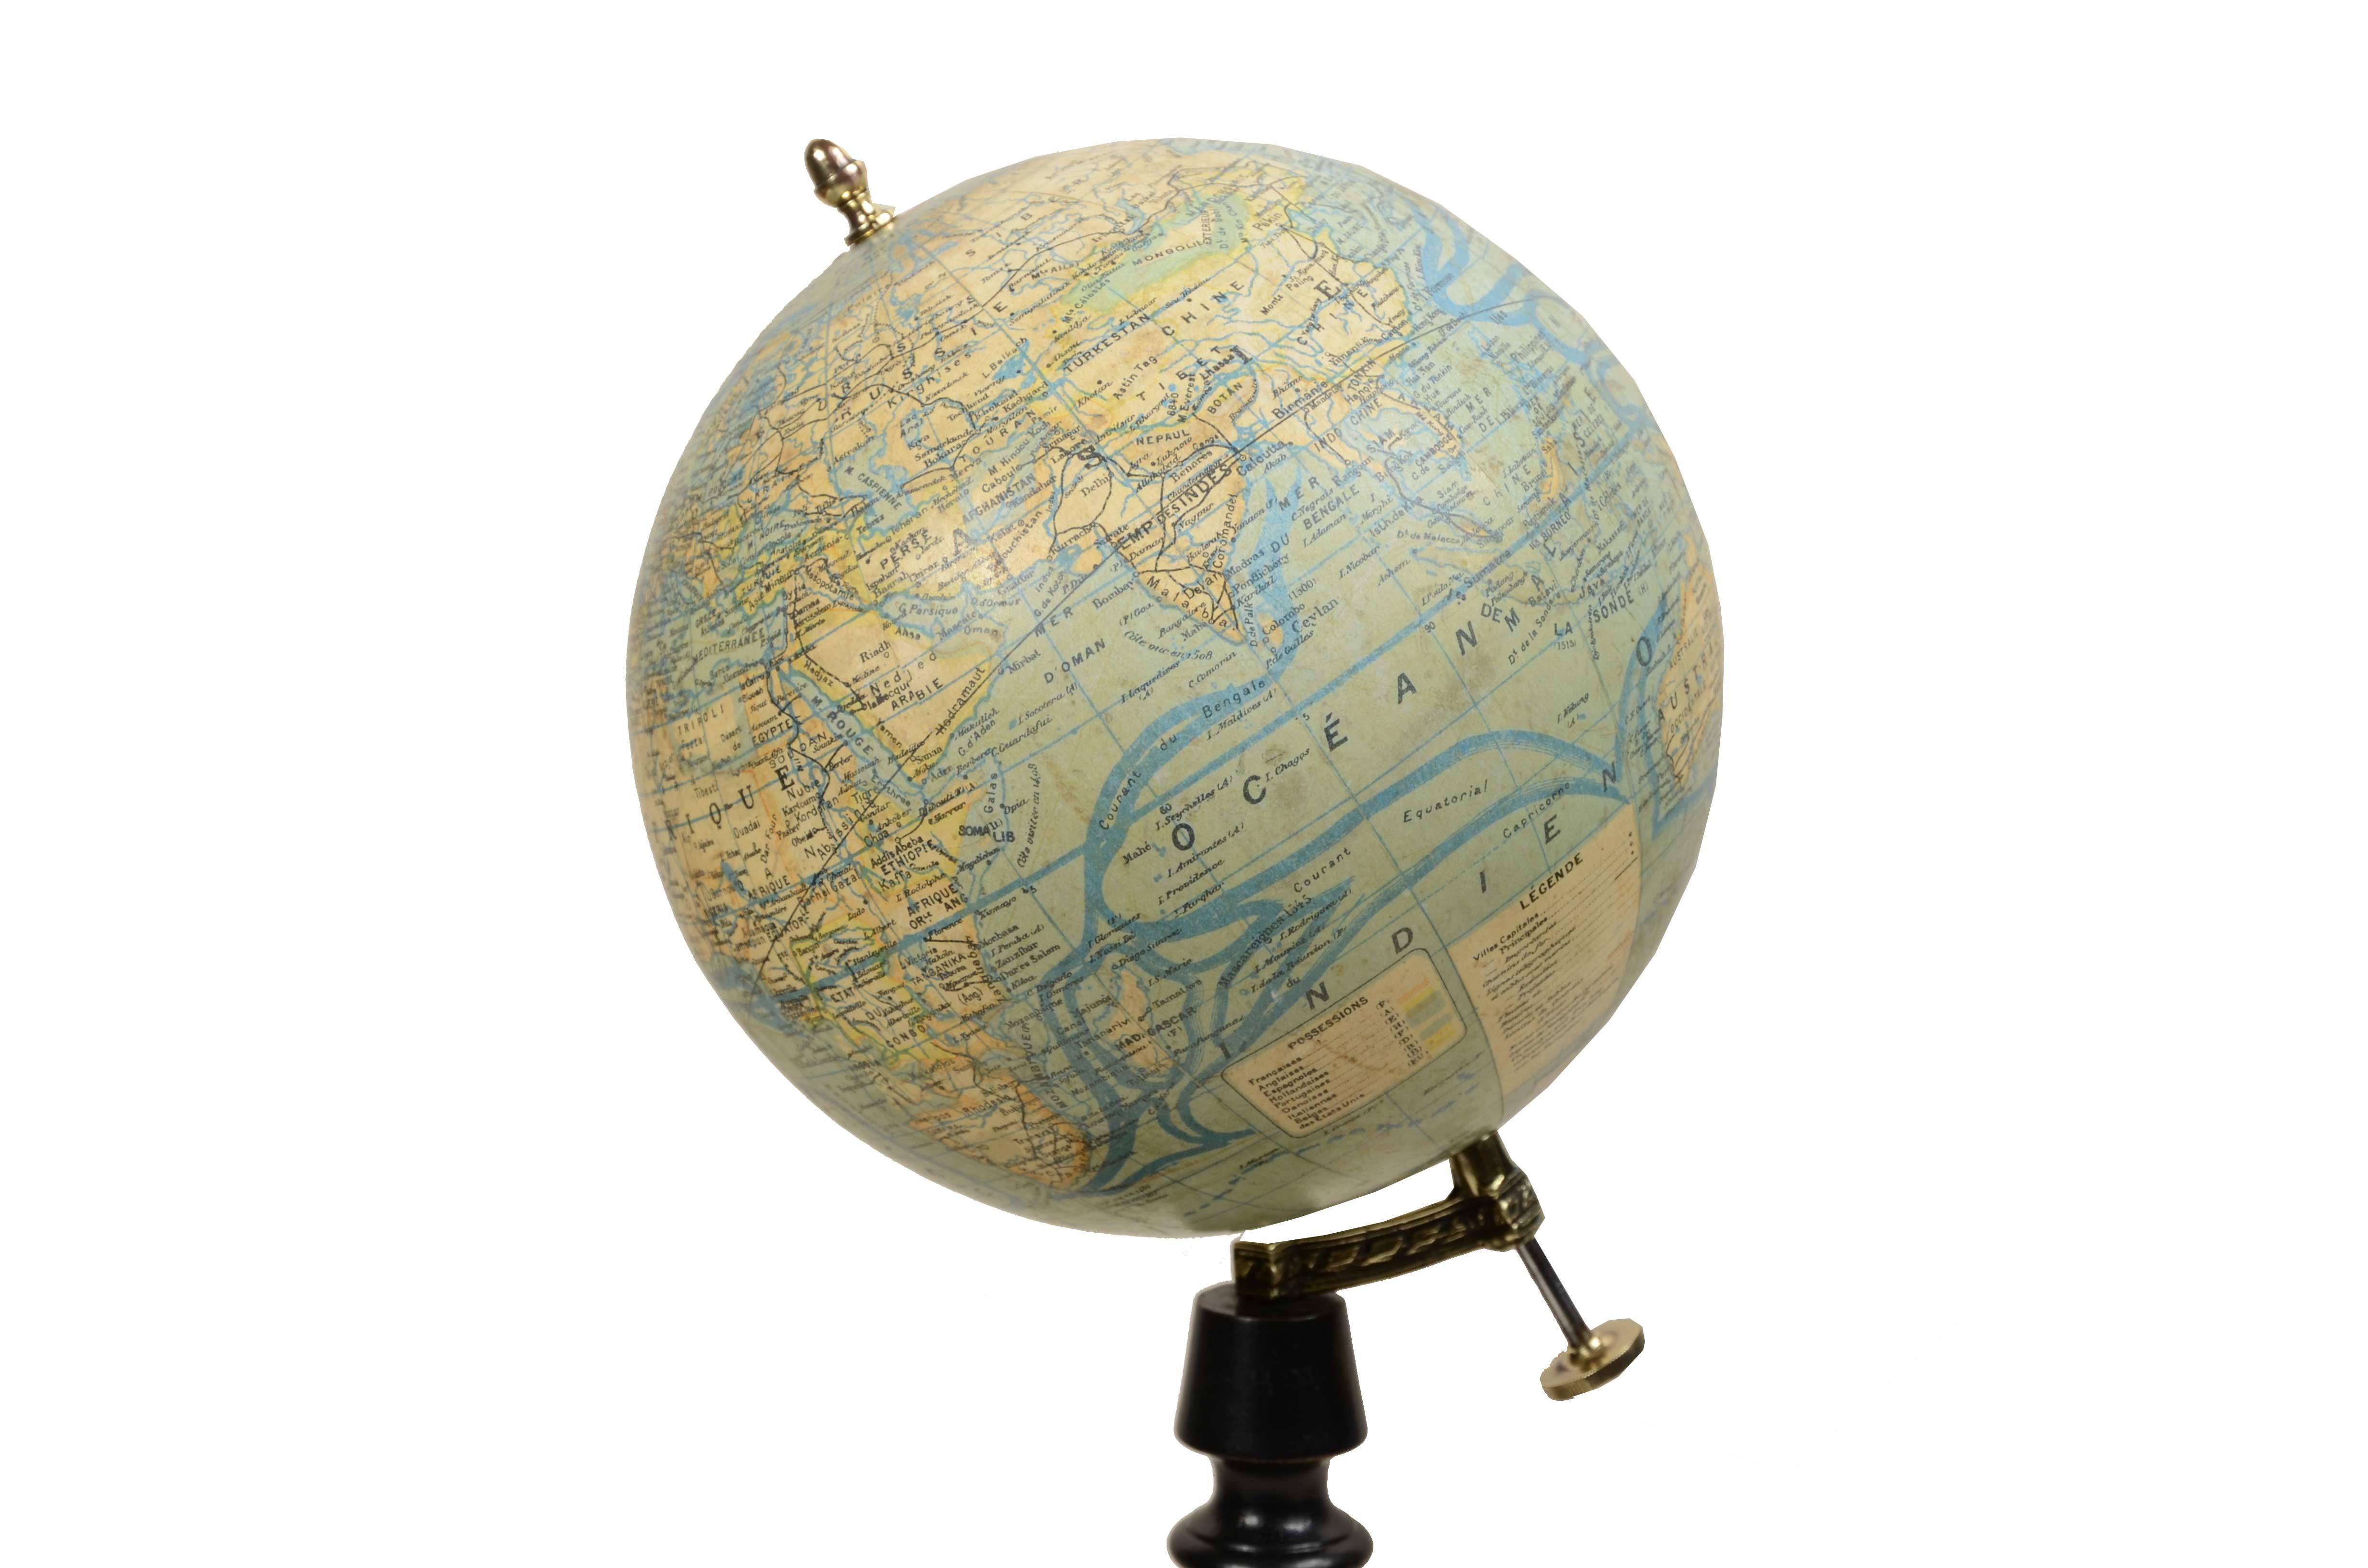 Globe  terrestrre edited in the 1930s by French geographer J. Forest, the cartouche reads Dressé par J. FOREST Editeur Paris 17 - 19 Rue de Buci. In addition to the very well delineated spatial map are depicted ocean currents. Good condition, good